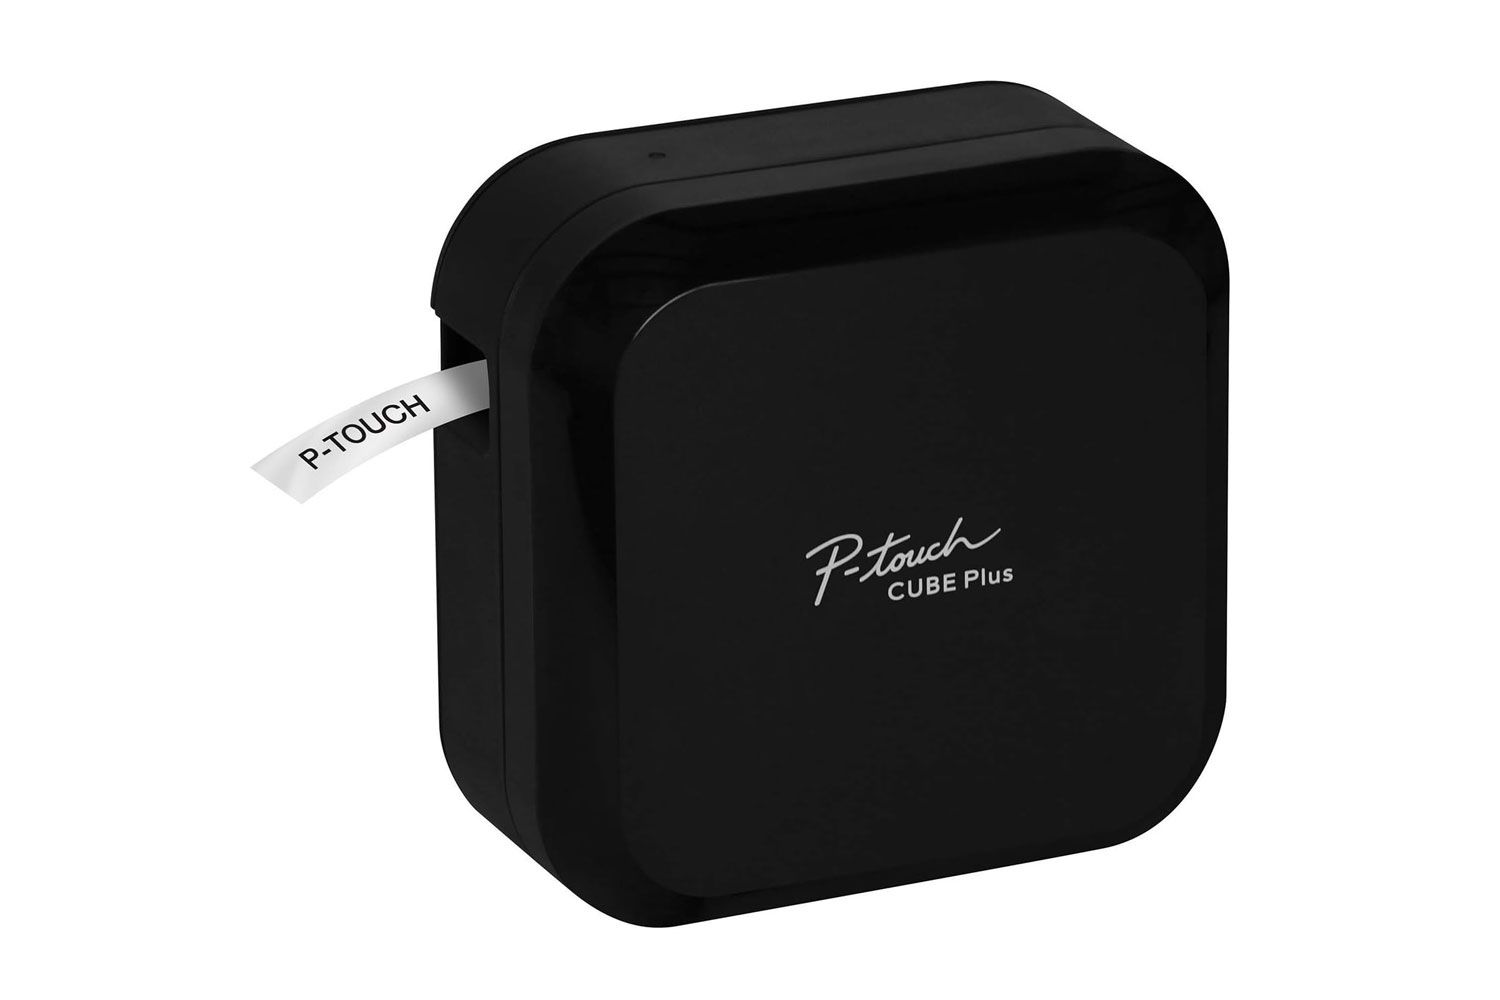  Brother P-Touch Cube Plus